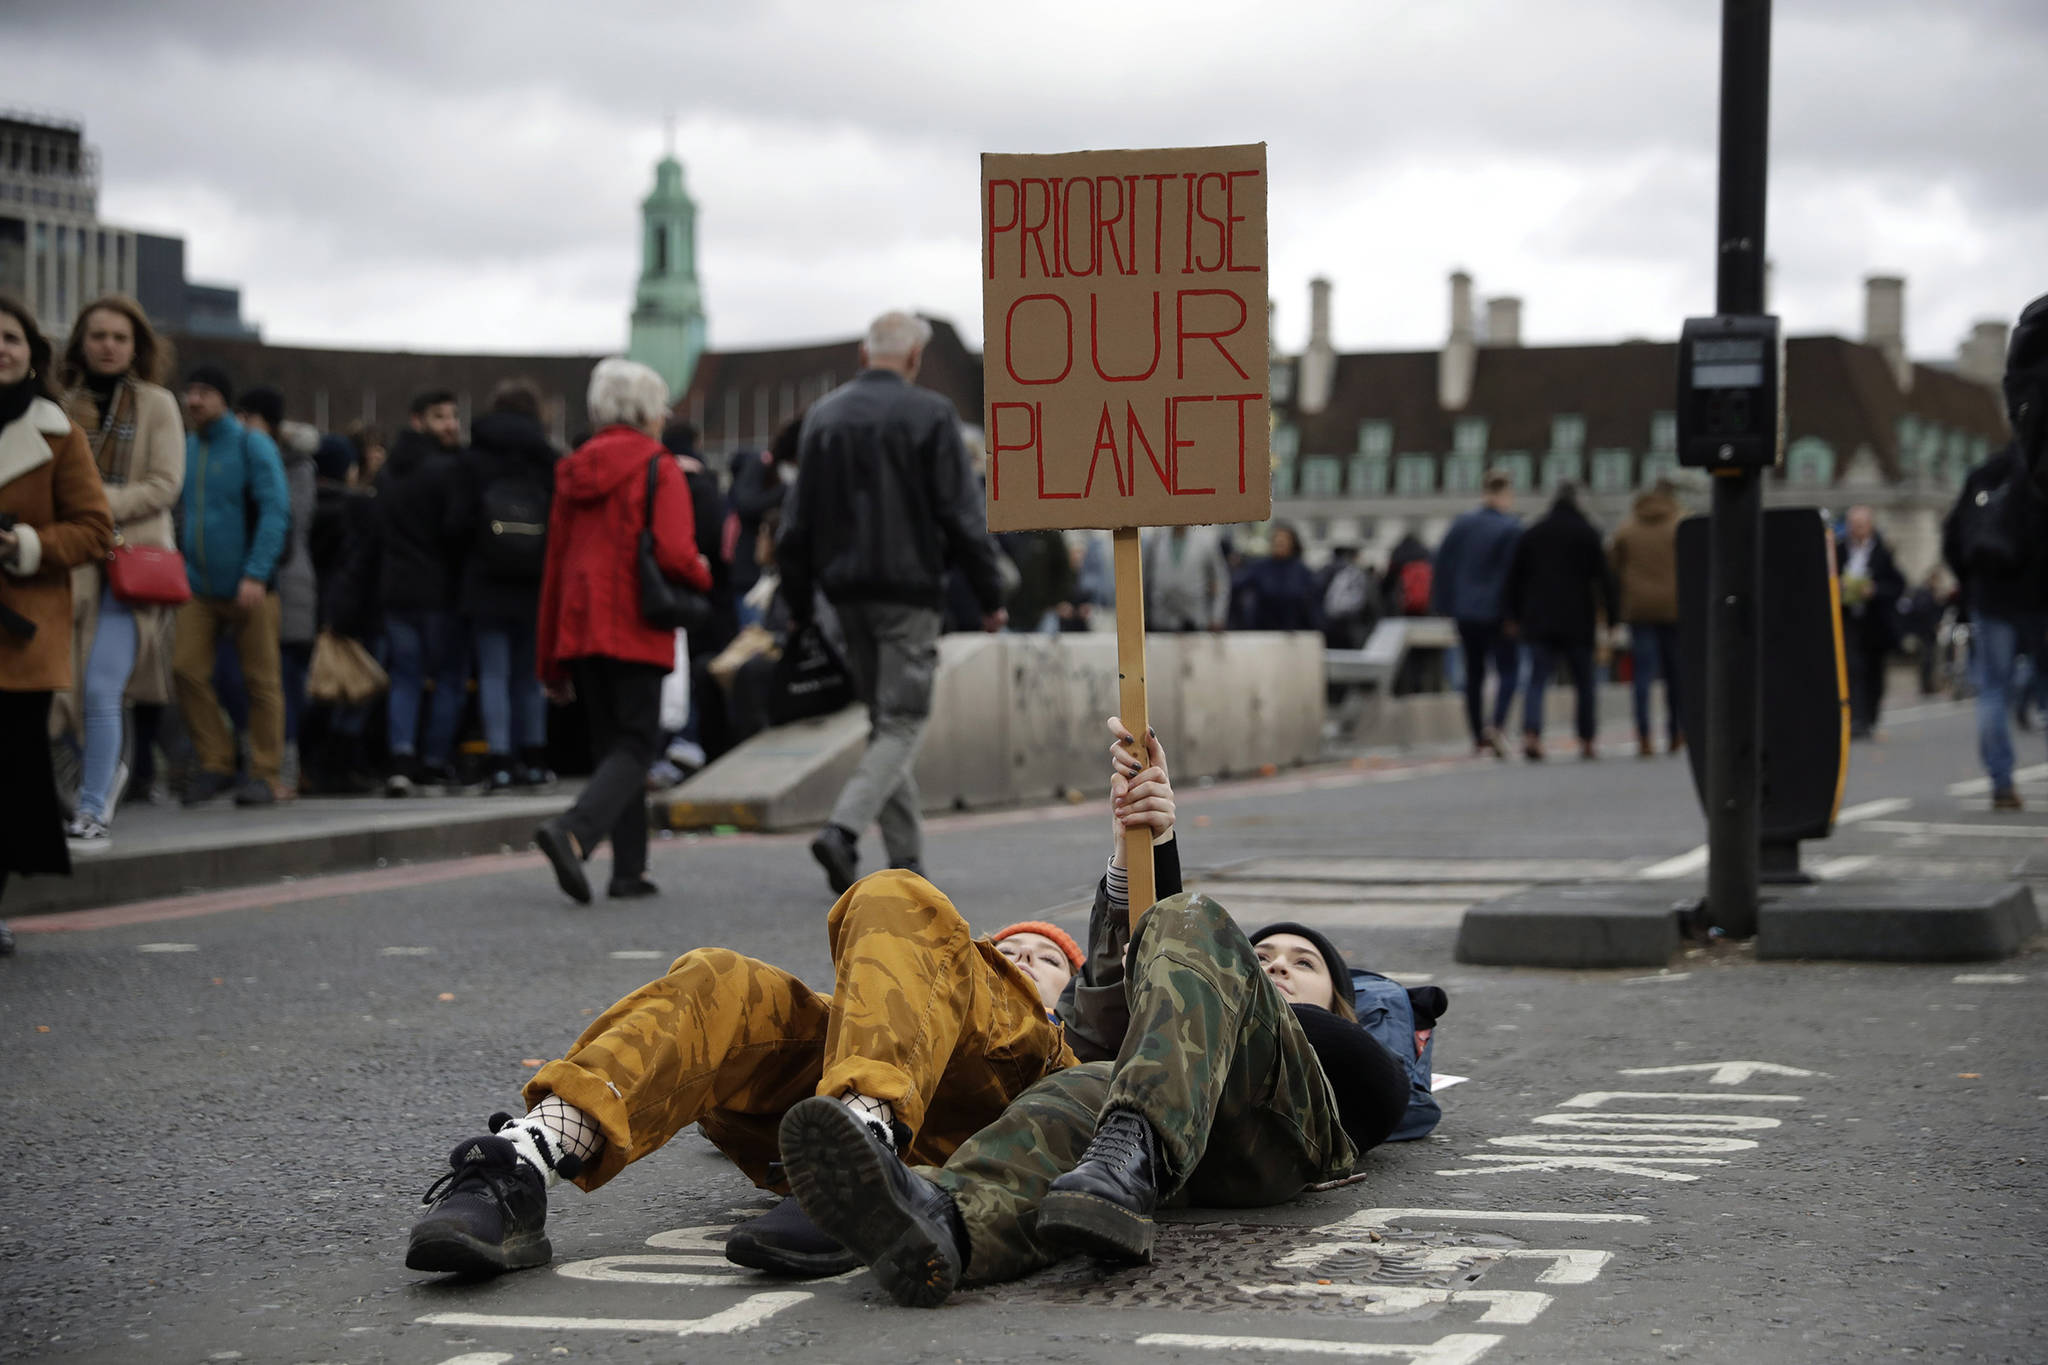 Youngsters lay down as they take part in a student climate protest at the bottom of Westminster Bridge in London, Friday, March 15, 2019. Students in more than 80 countries and territories worldwide plan to skip class Friday in protest over their governments’ failure to act against global warming. The coordinated ‘school strike’ was inspired by 16-year-old activist Greta Thunberg, who began holding solitary demonstrations outside the Swedish parliament last year. (AP Photo/Matt Dunham)